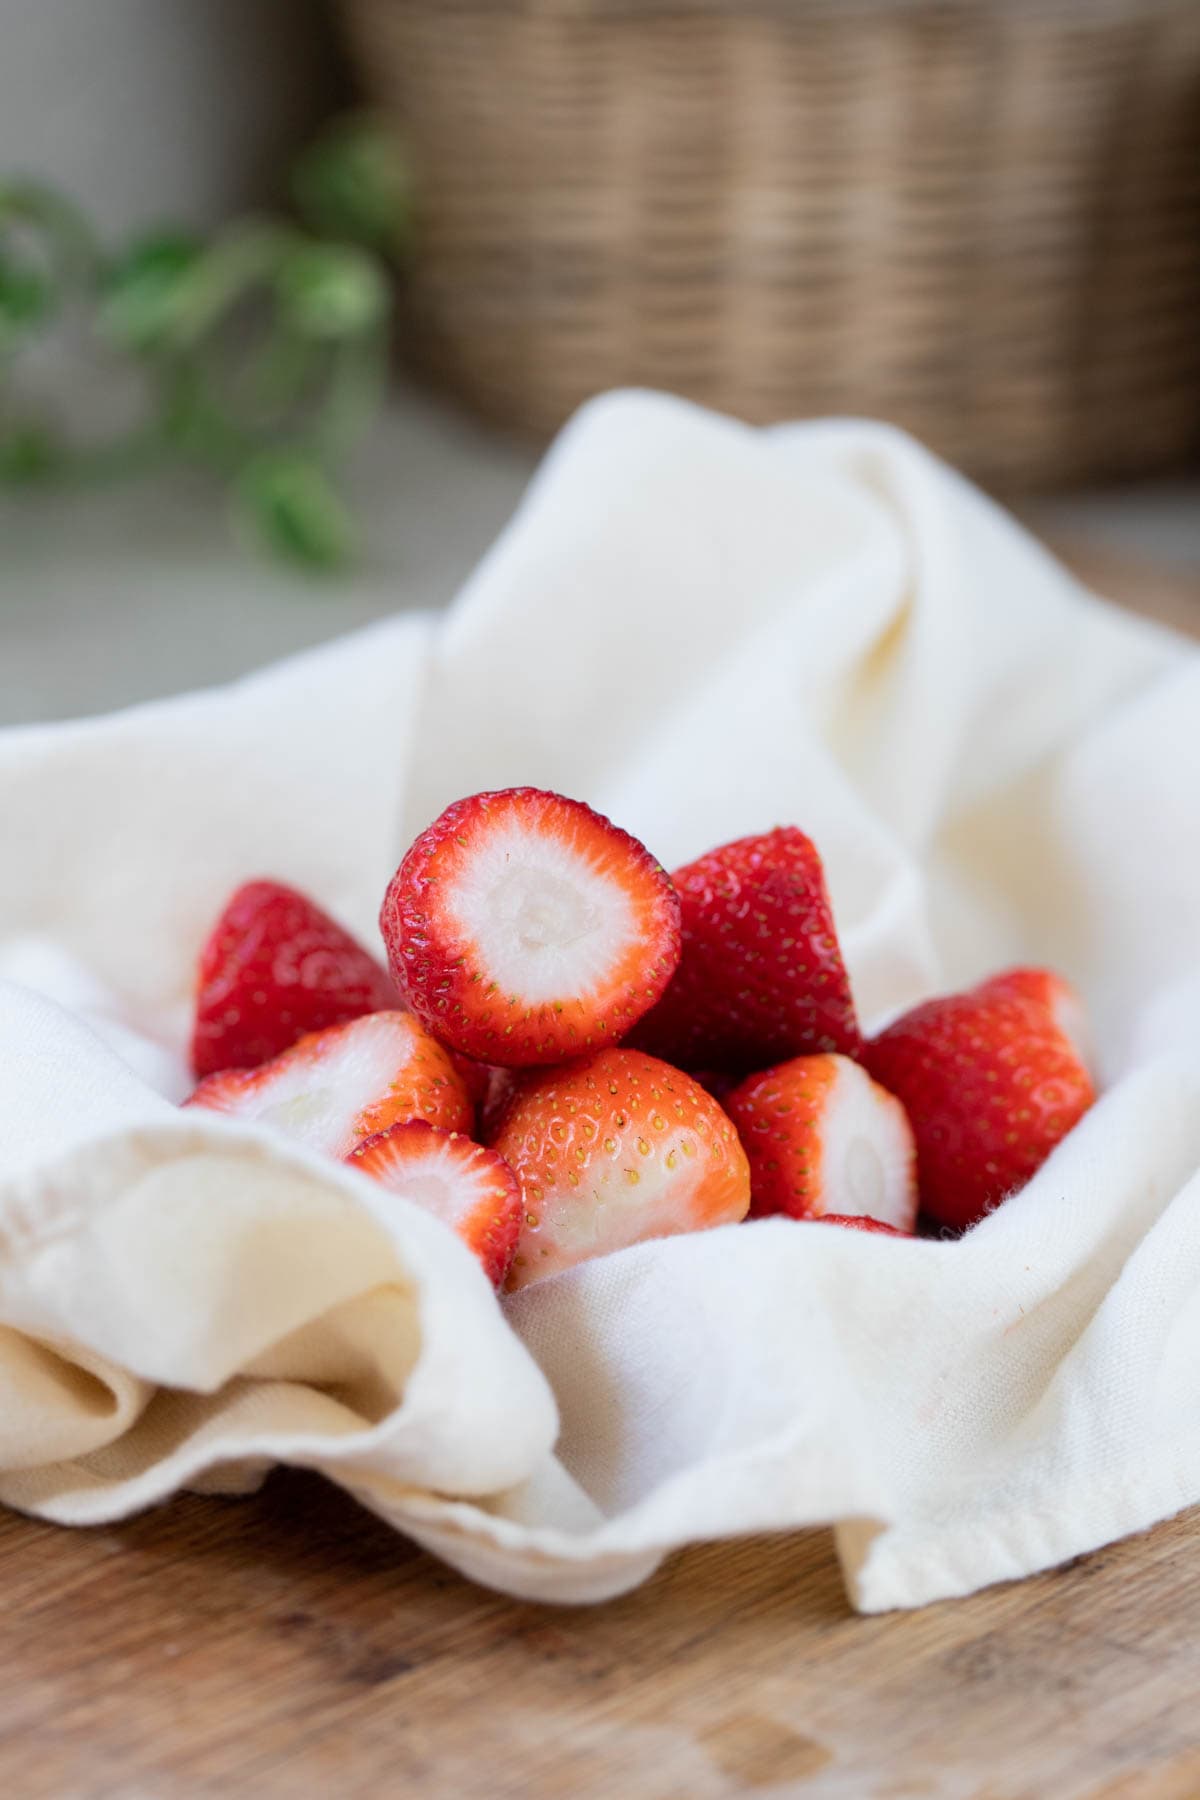 drying the strawberries with a towel